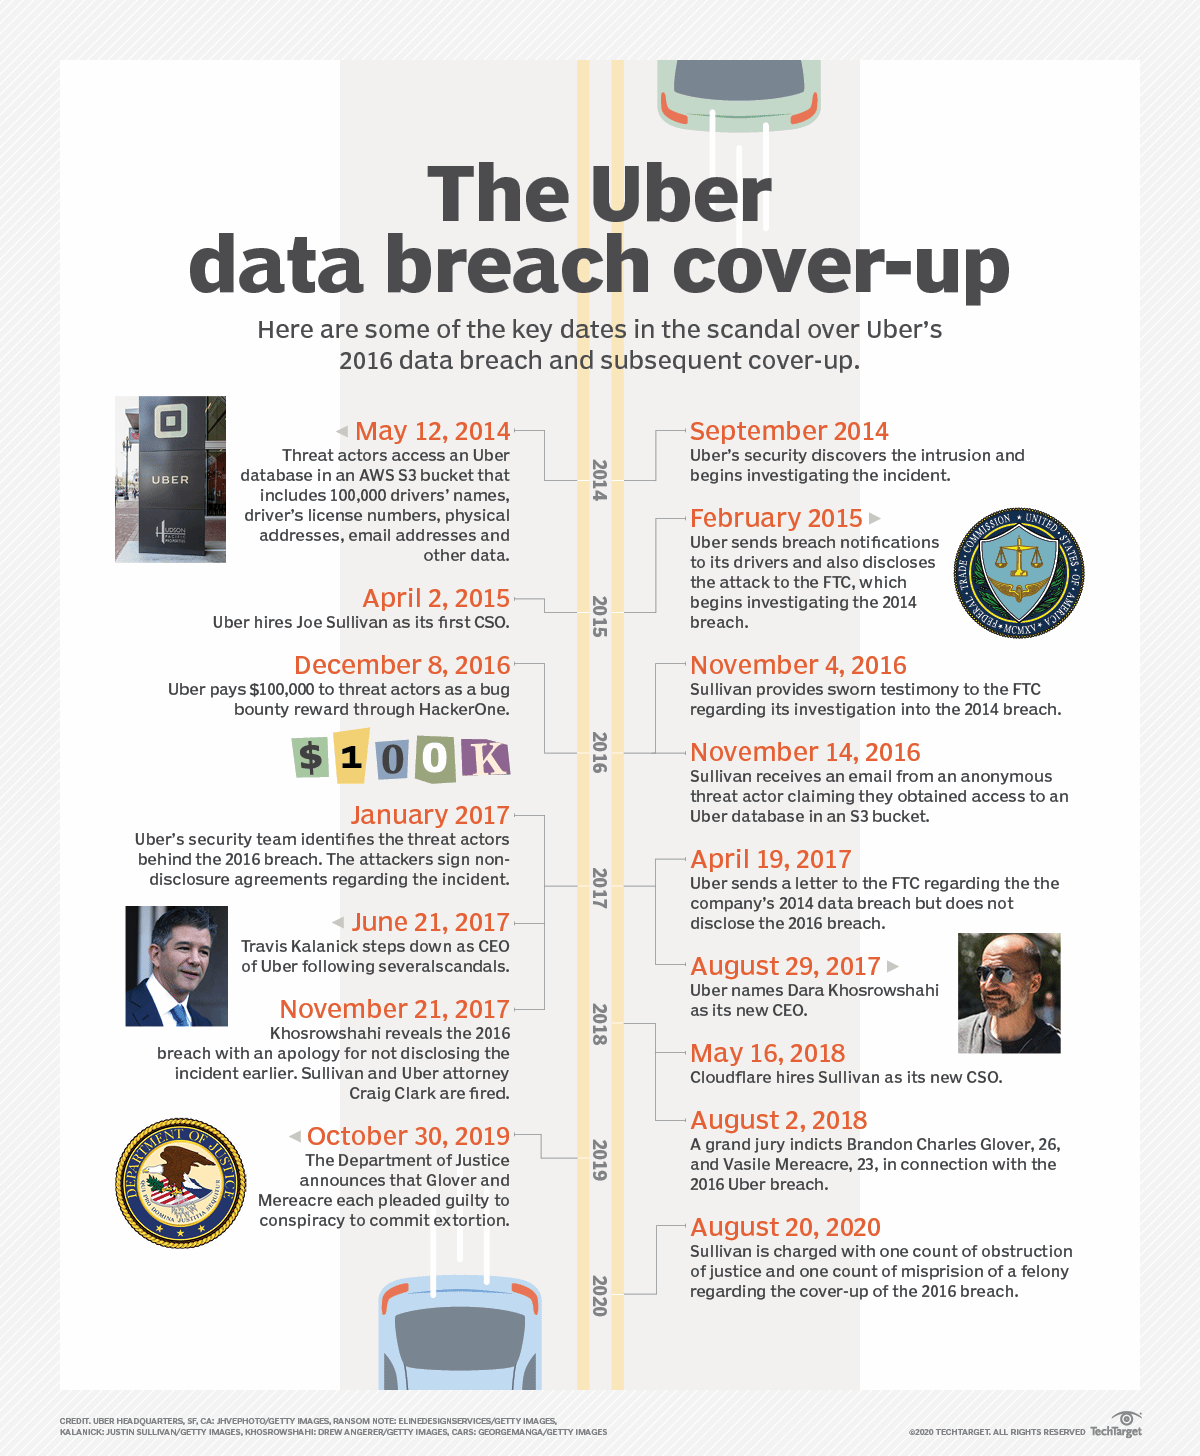 The Uber data breach coverup A timeline of events TechTarget